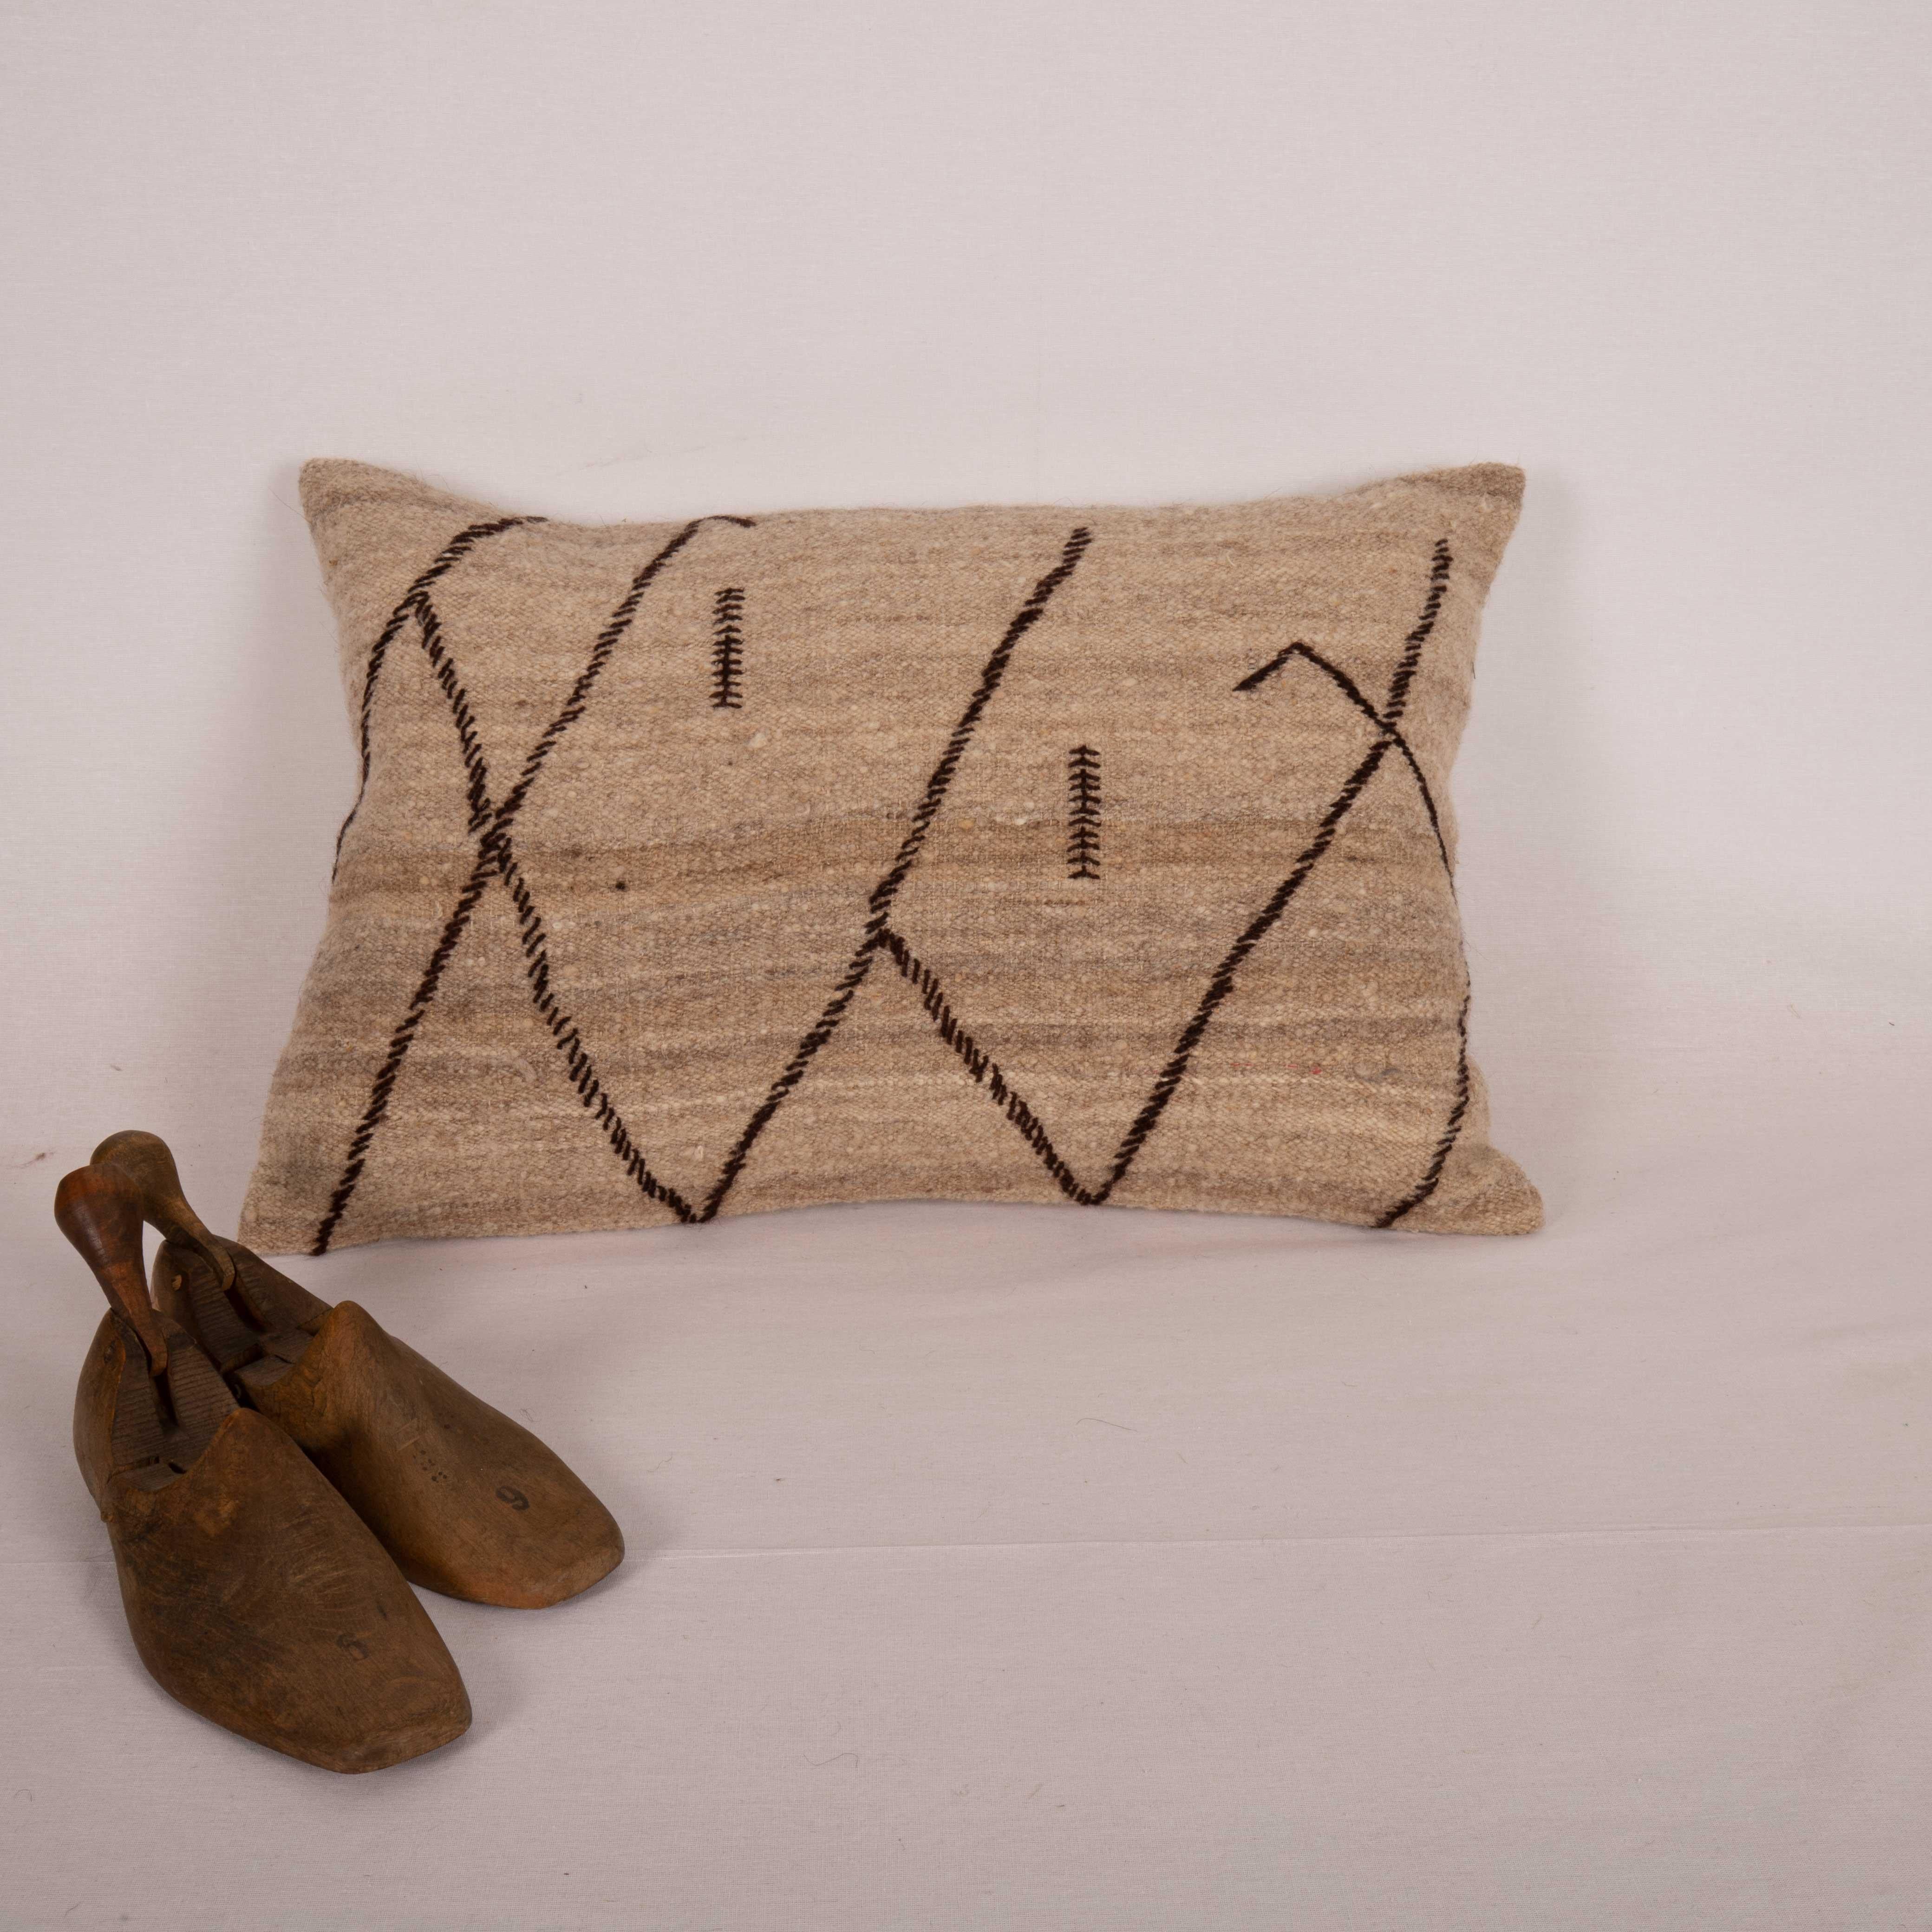 Hand-Woven Neutral Pillow Case Made from a Vintage Wool Cover, Mid 20th C For Sale